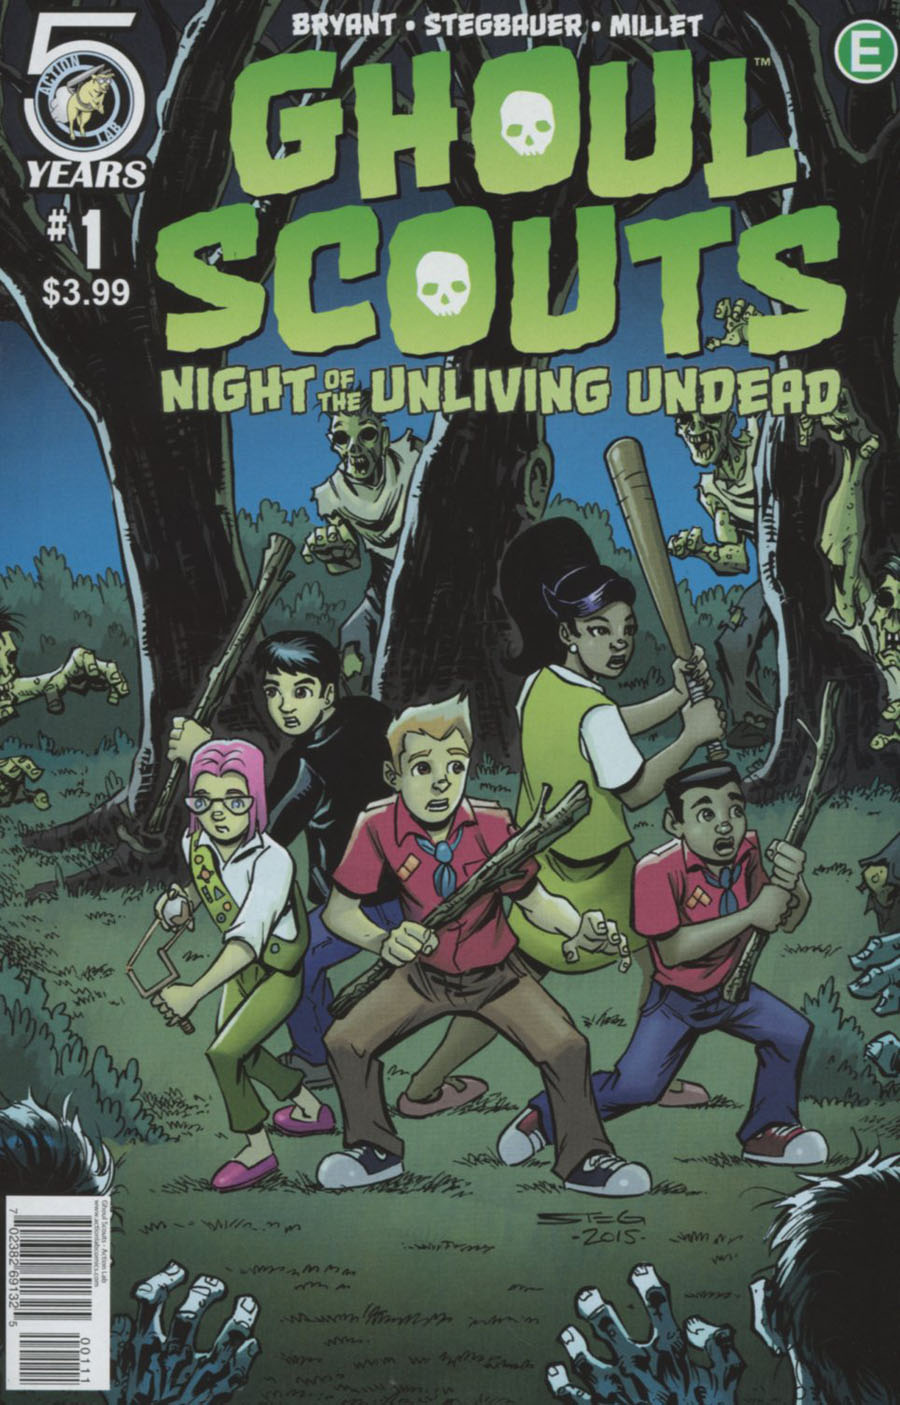 Ghoul Scouts Night Of The Unliving Undead #1 Cover A Regular Mark Stegbauer Cover